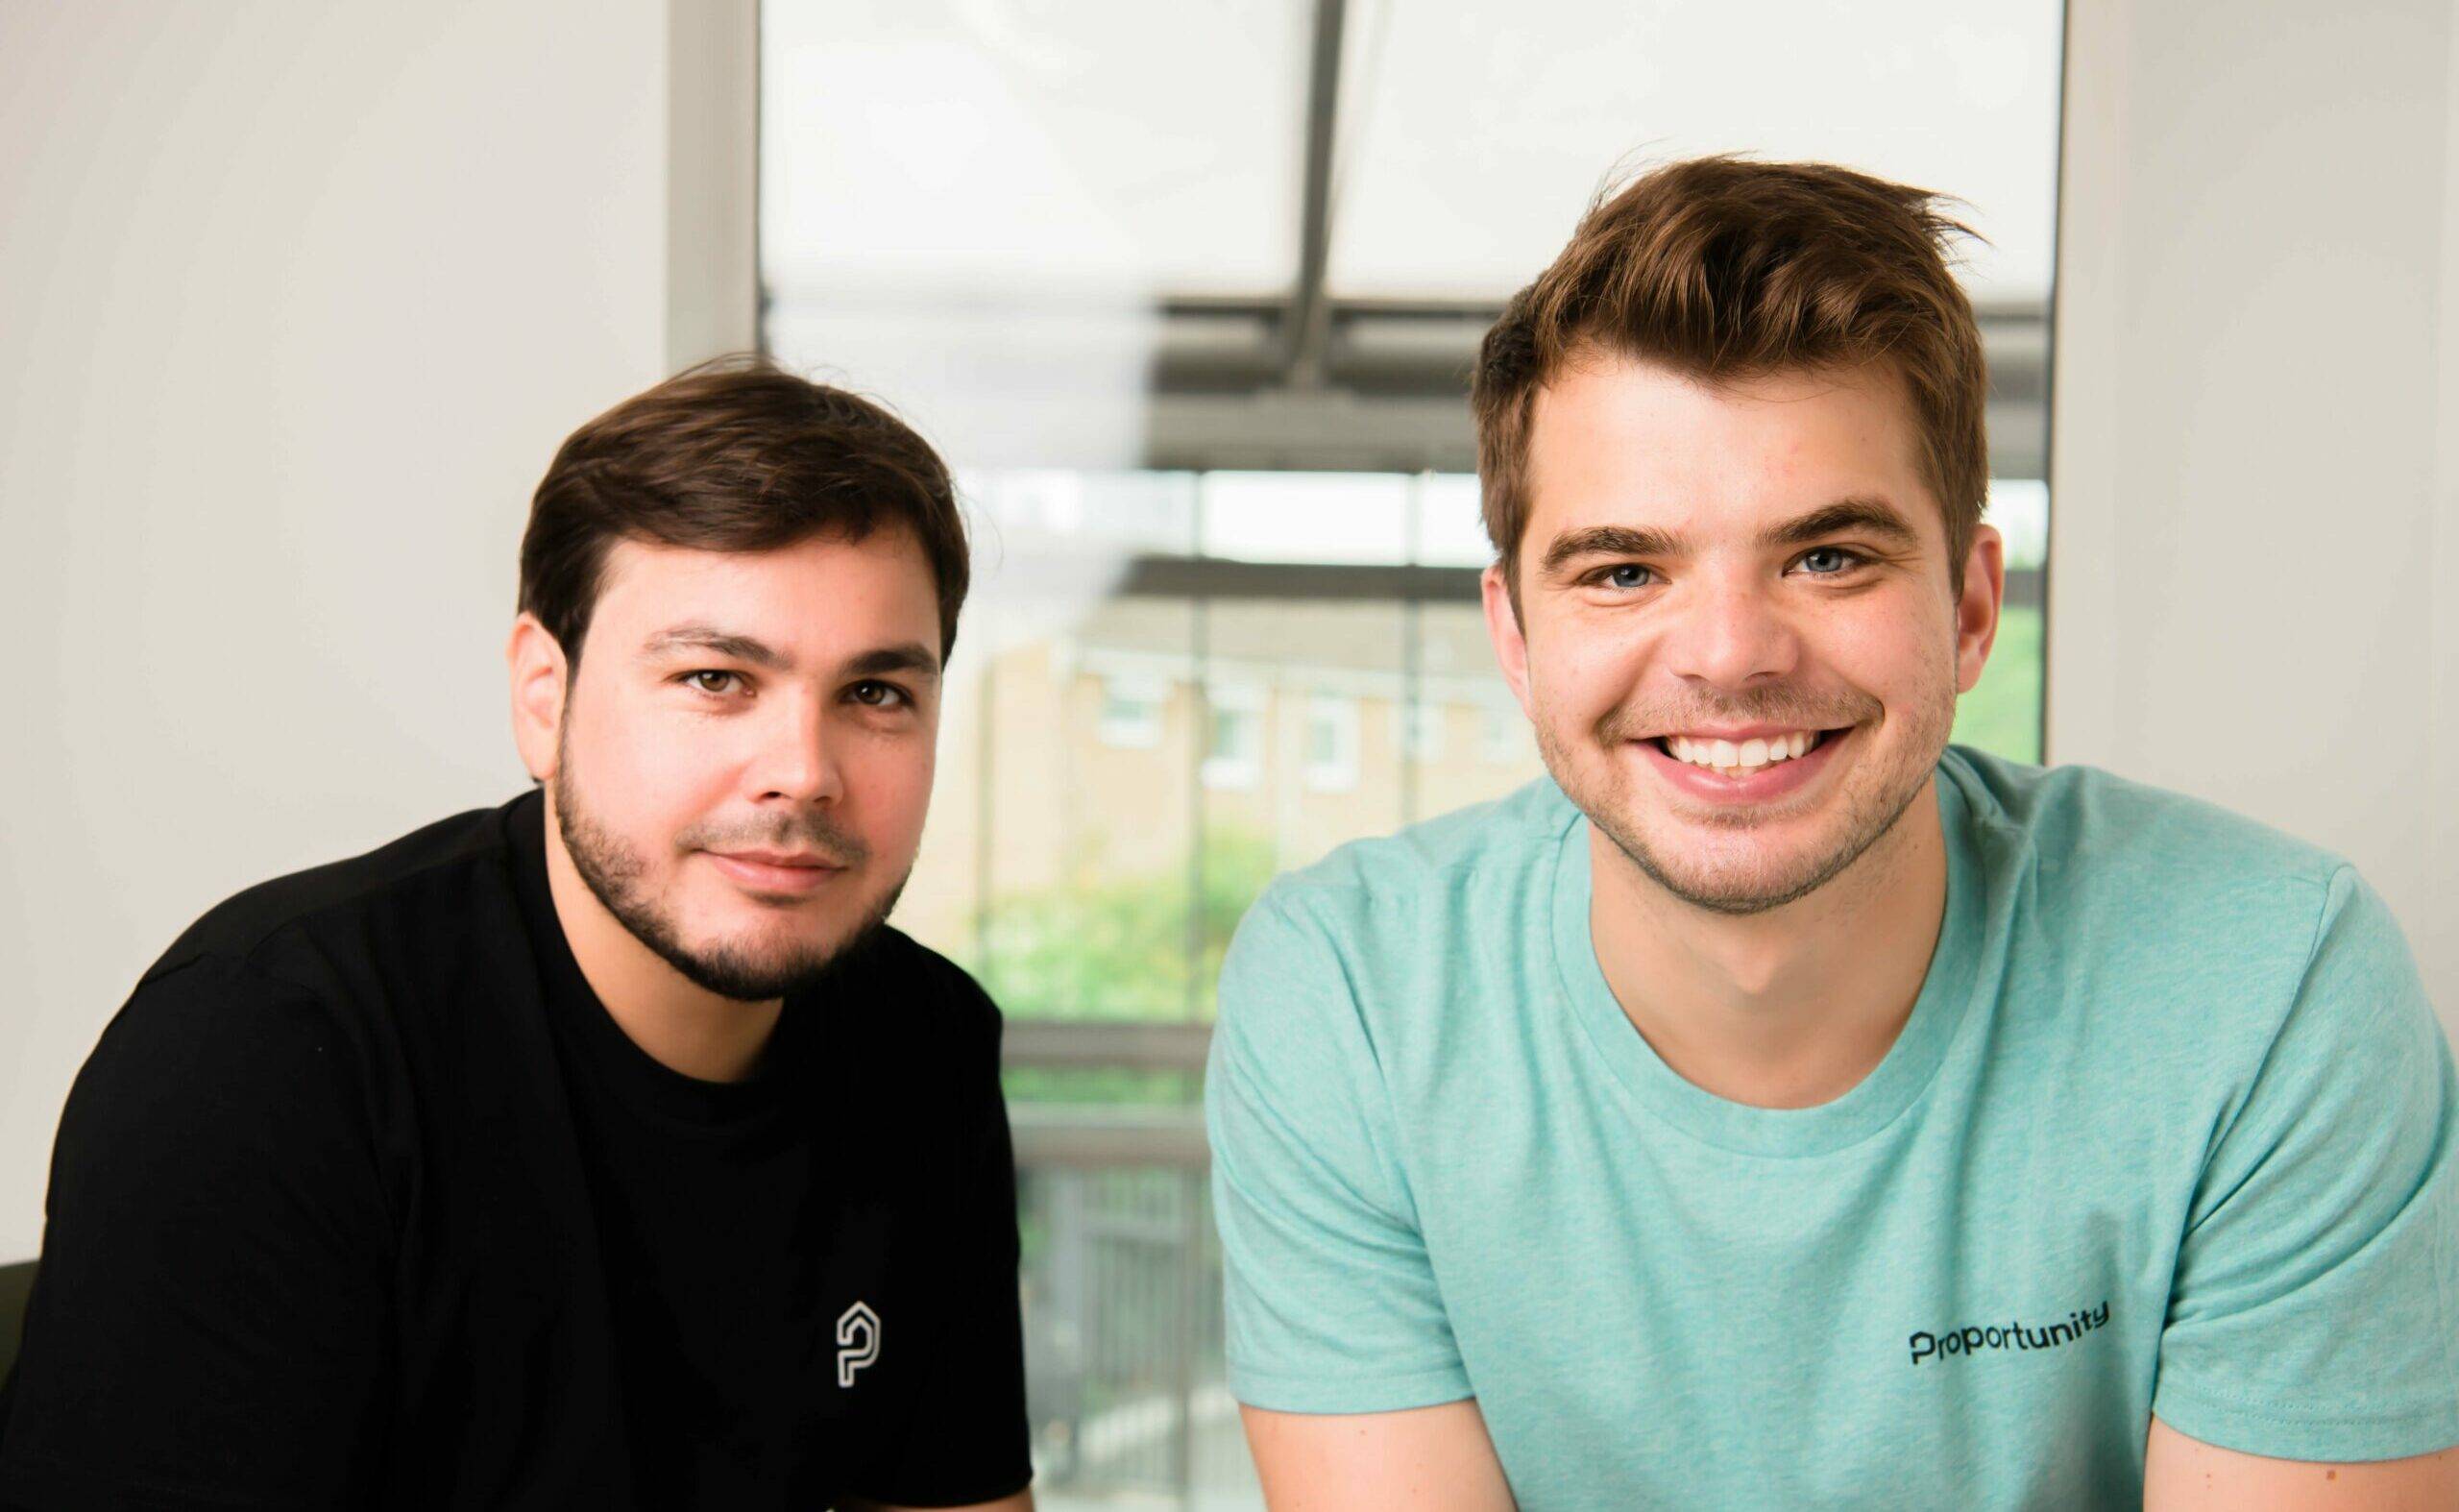 Meet Propertunity, the startup that wants to get you on the property ladder